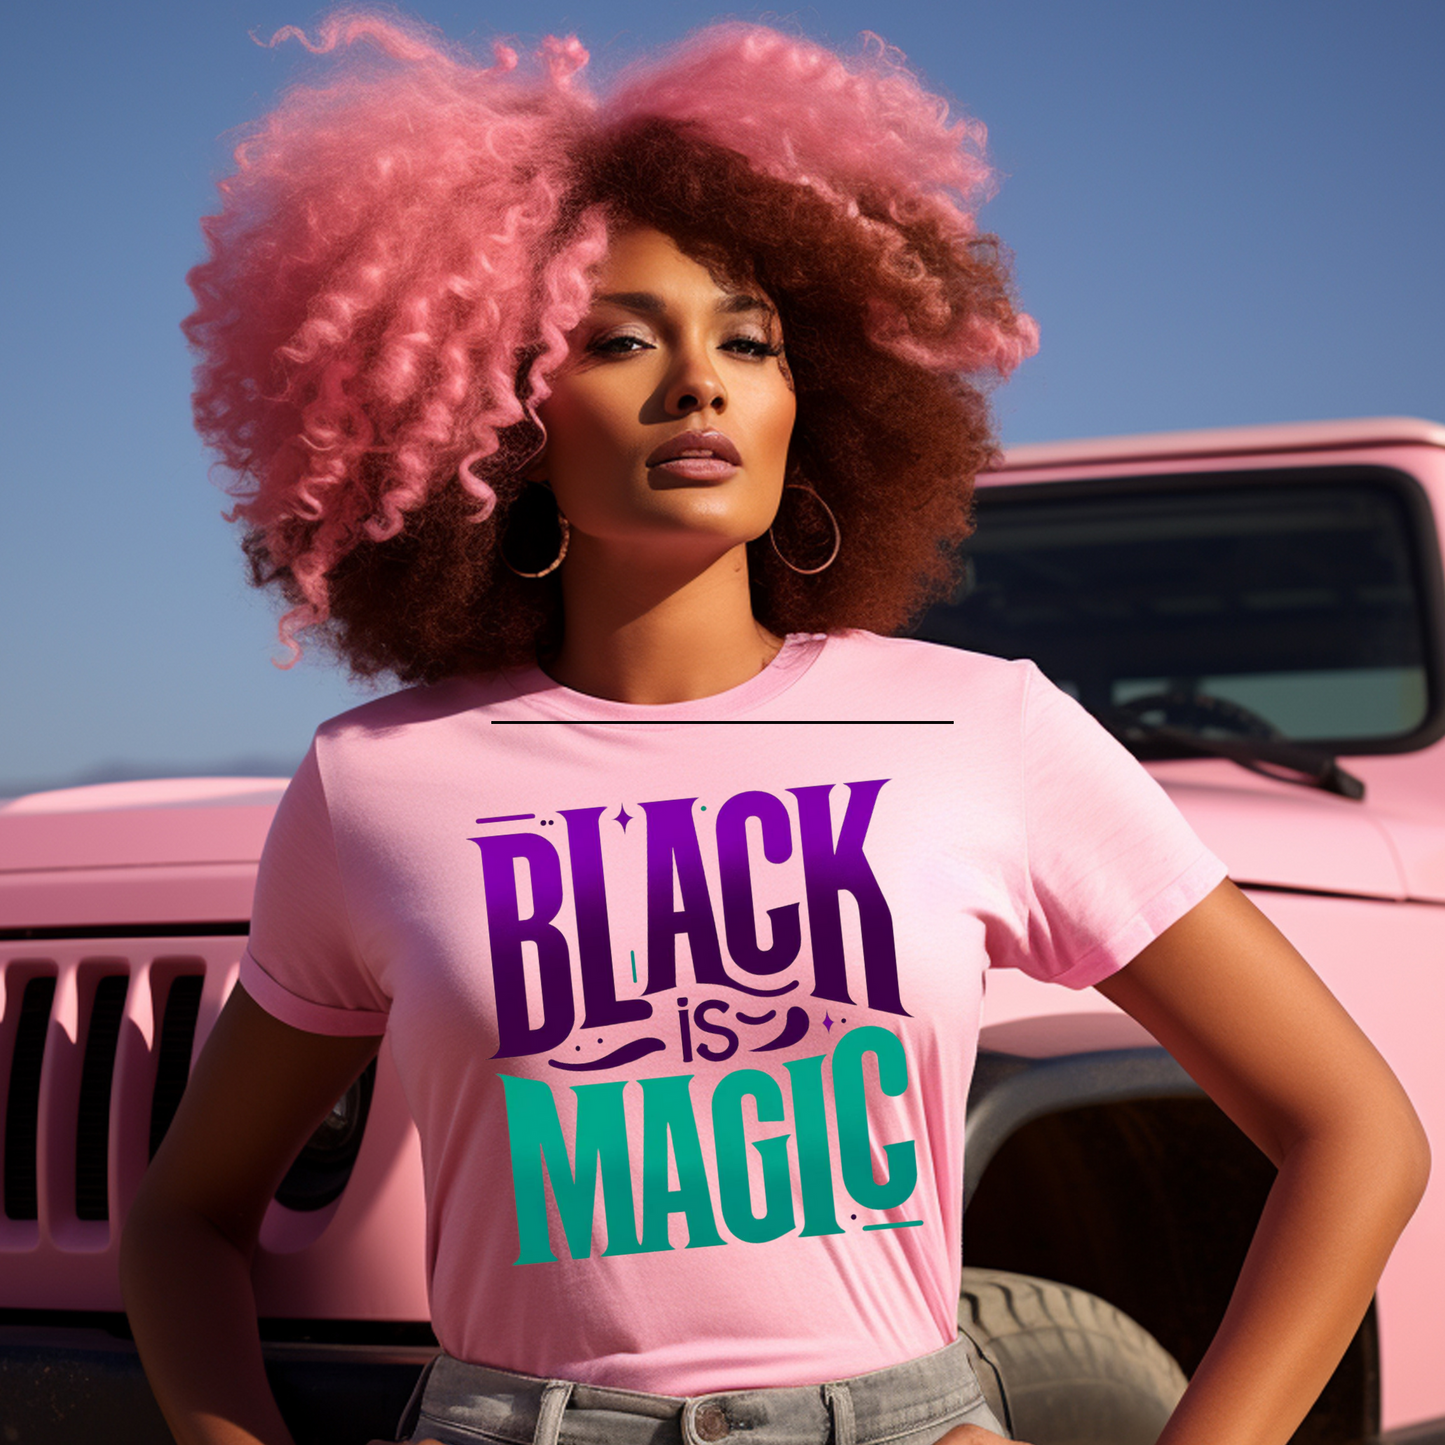 Free "Black Is Magic" PNG Designs - Vibrant Art for T-Shirts, Mugs, Tumblers, and More